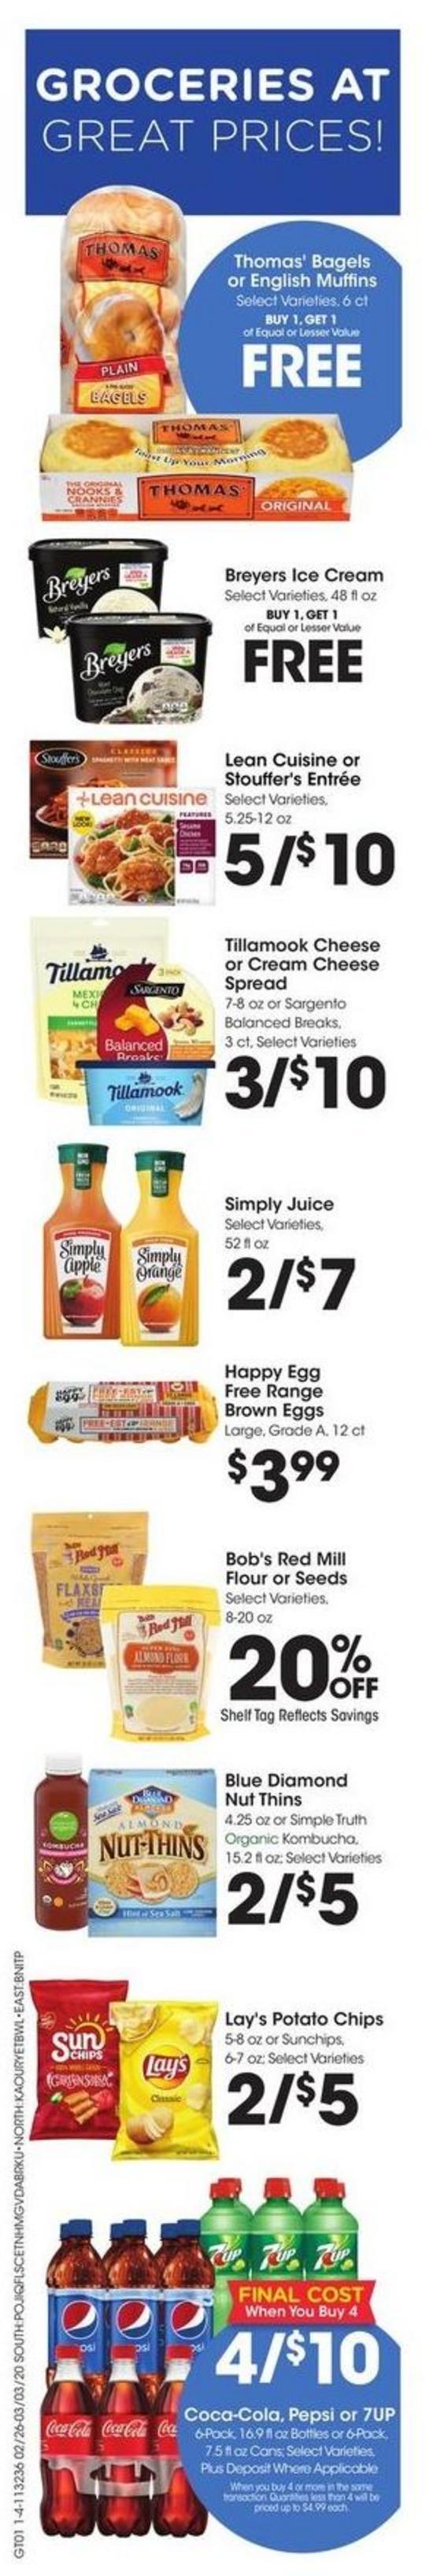 Fred Meyer Weekly Ad from February 26